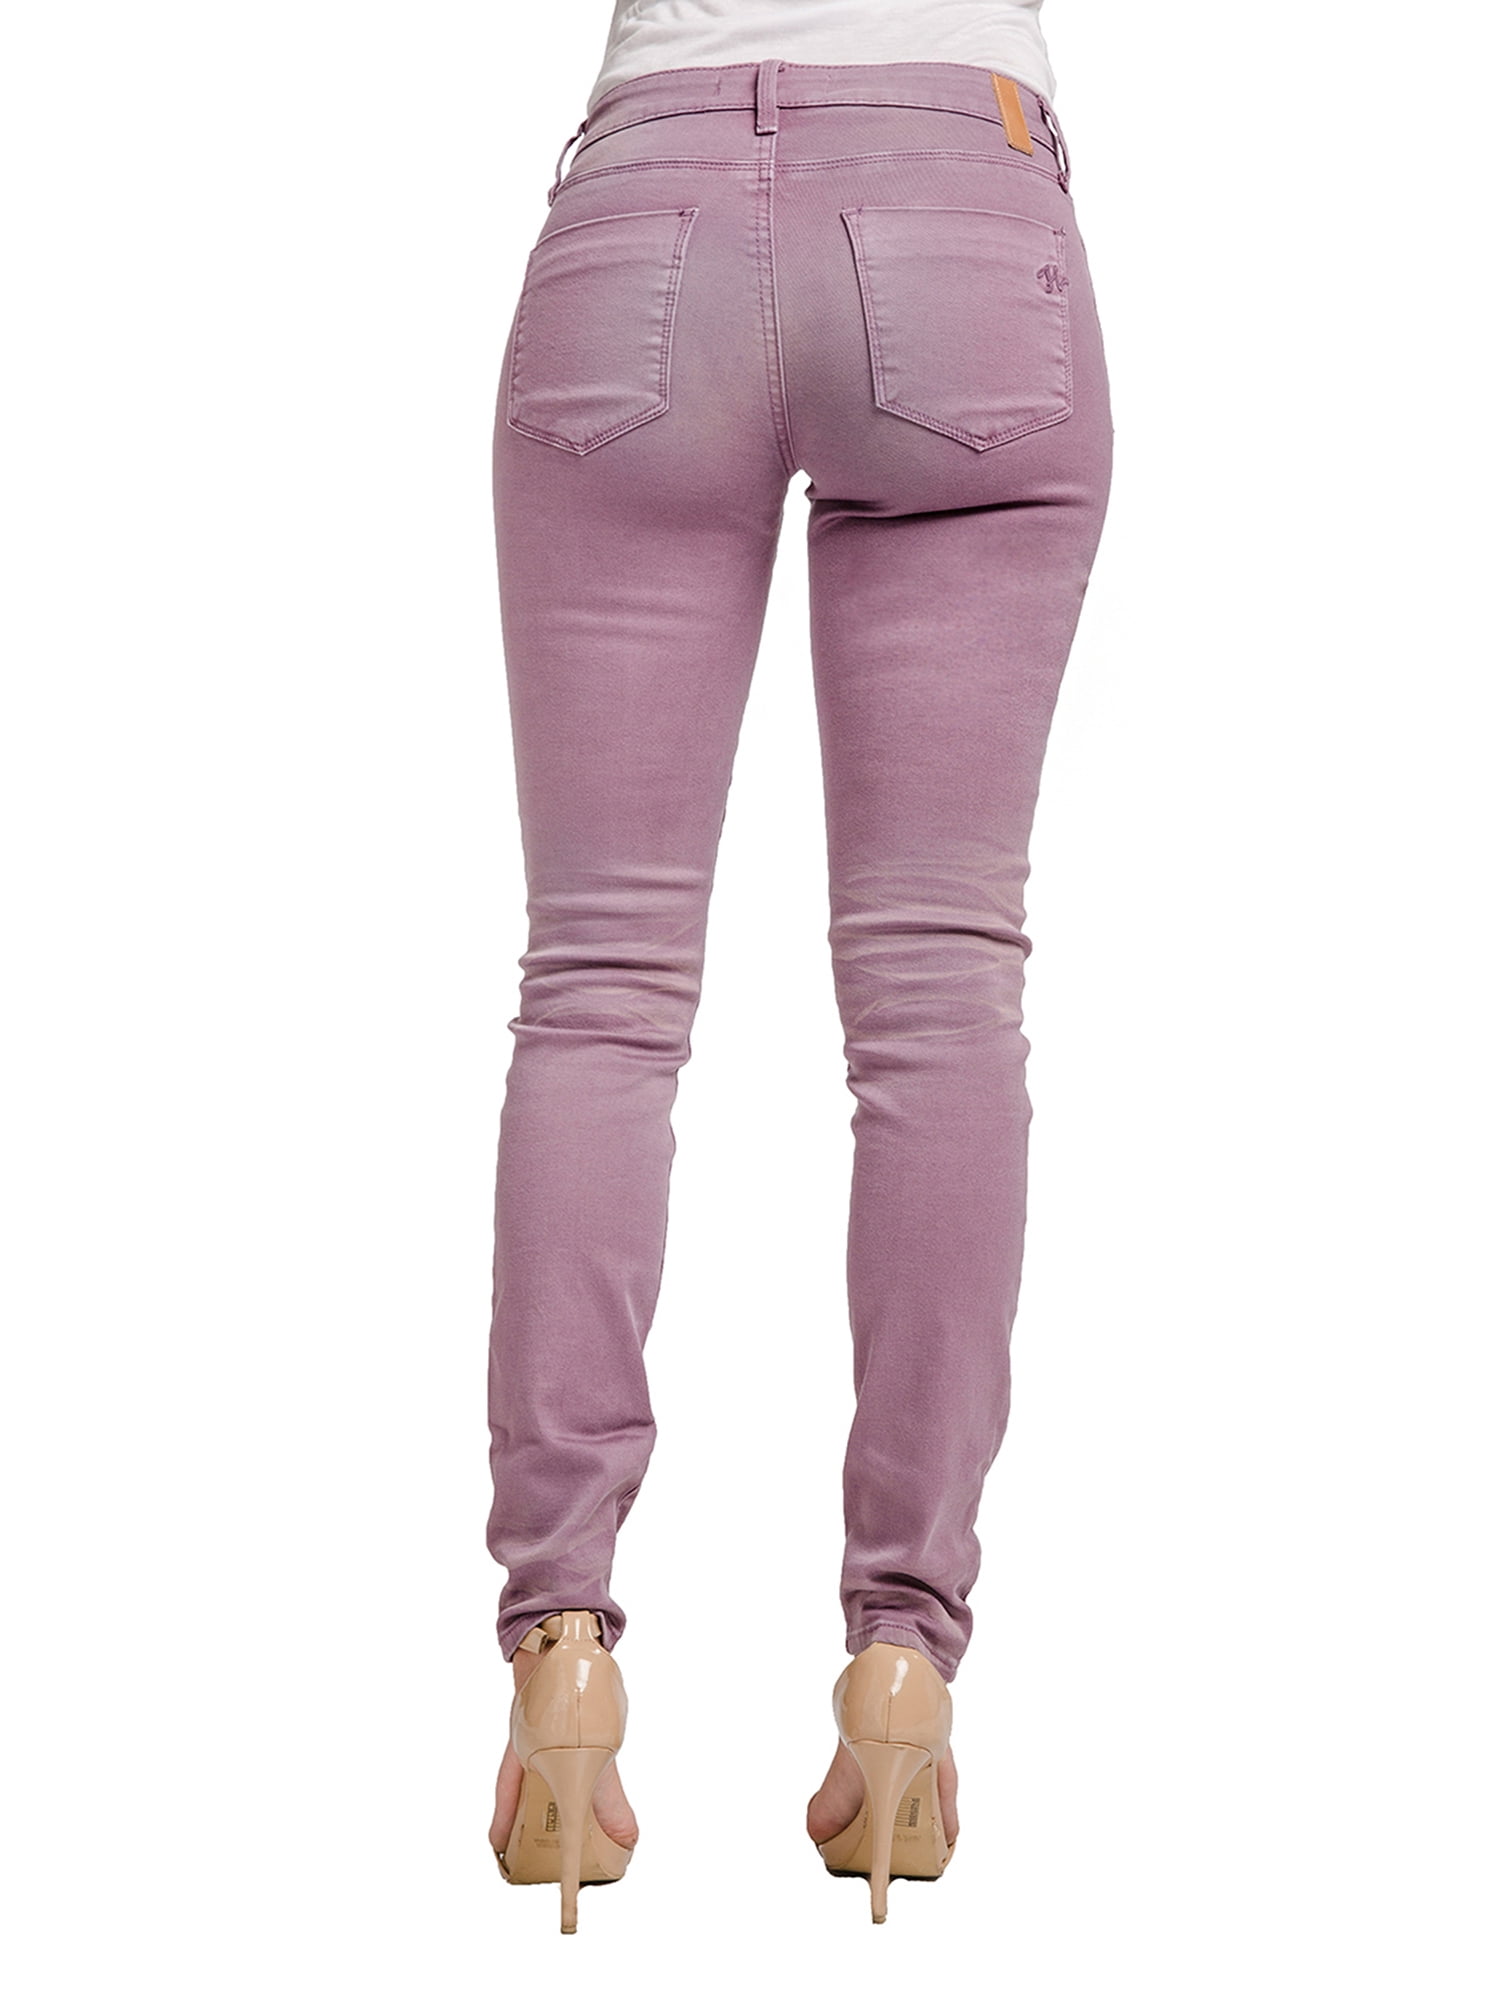 sand colored jeans womens